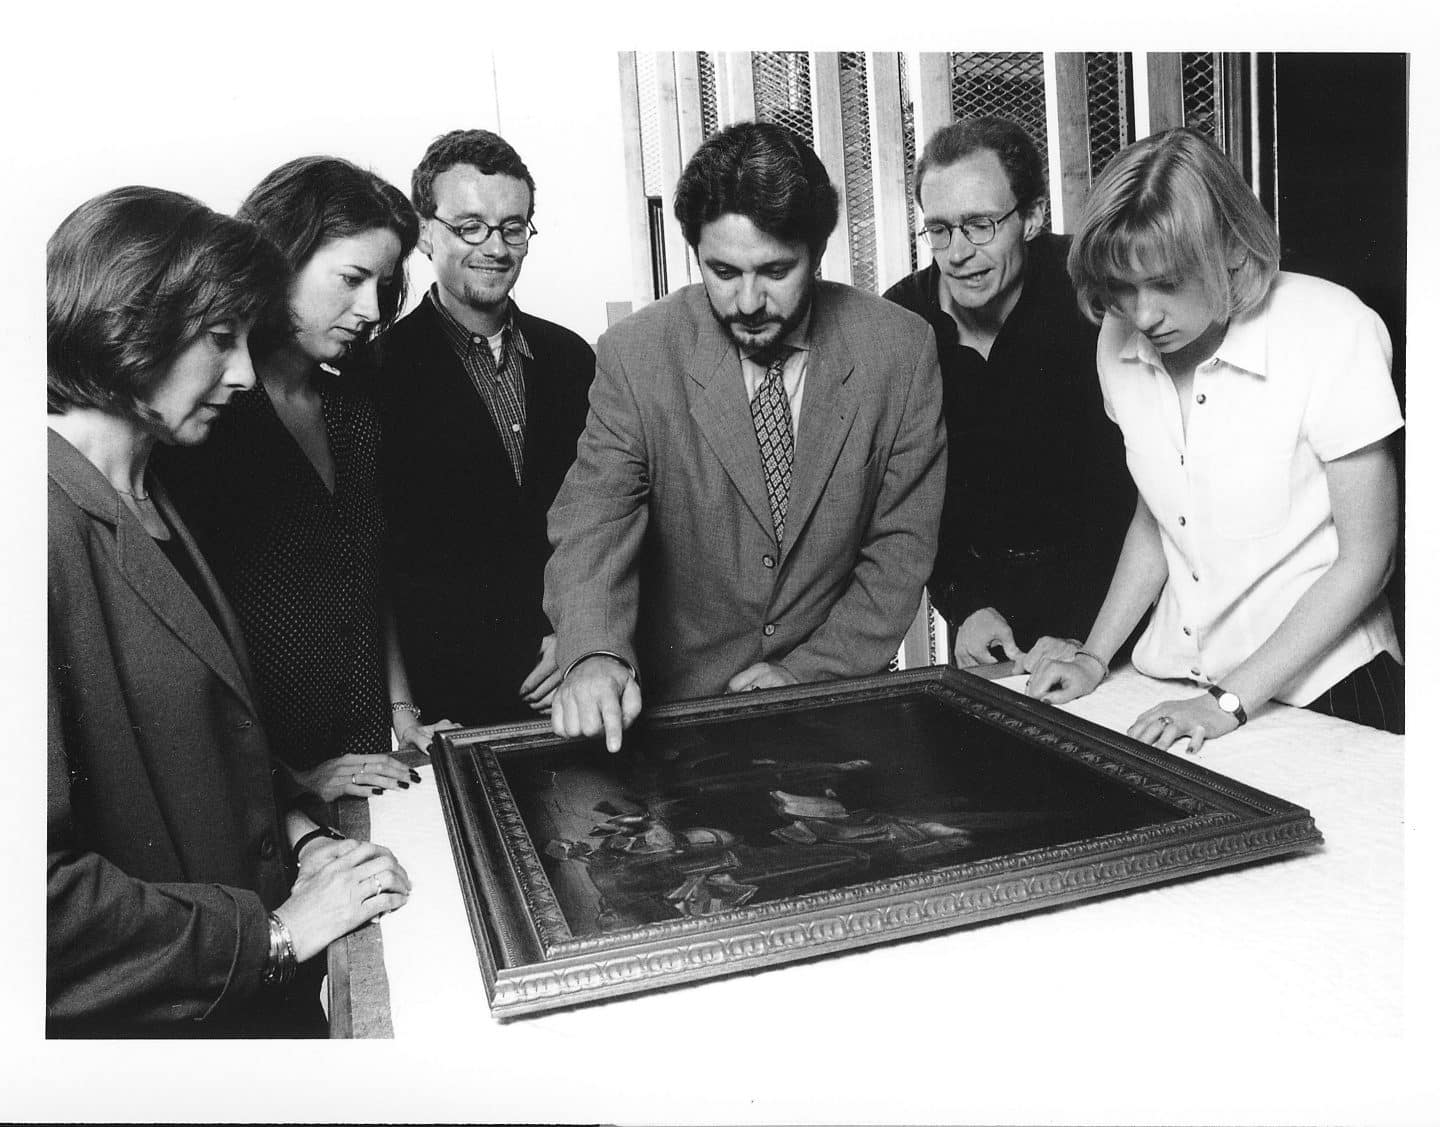 A professor with five students huddle around a painting on the table in front of them.